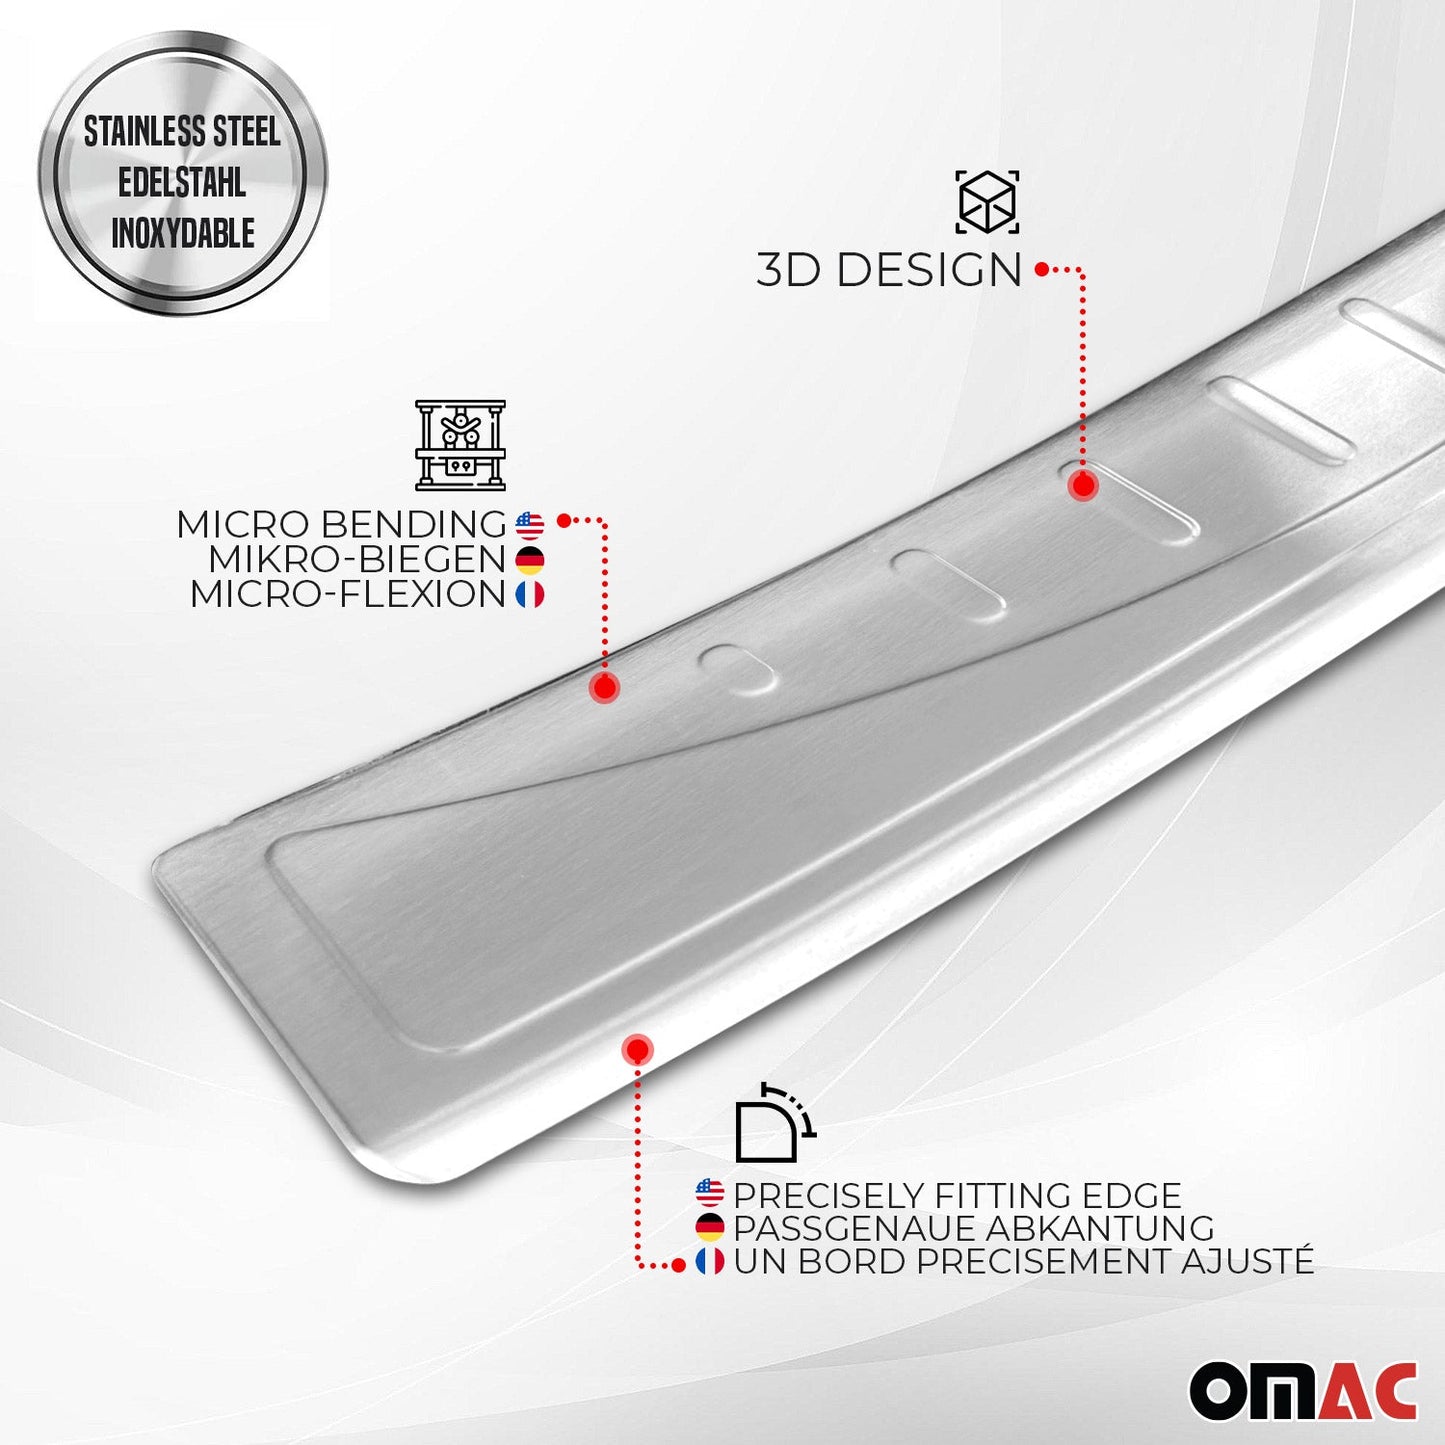 OMAC Rear Bumper Sill Cover Protector Guard for Audi SQ7 Q7 2017-2023 Brushed Steel 1119093T